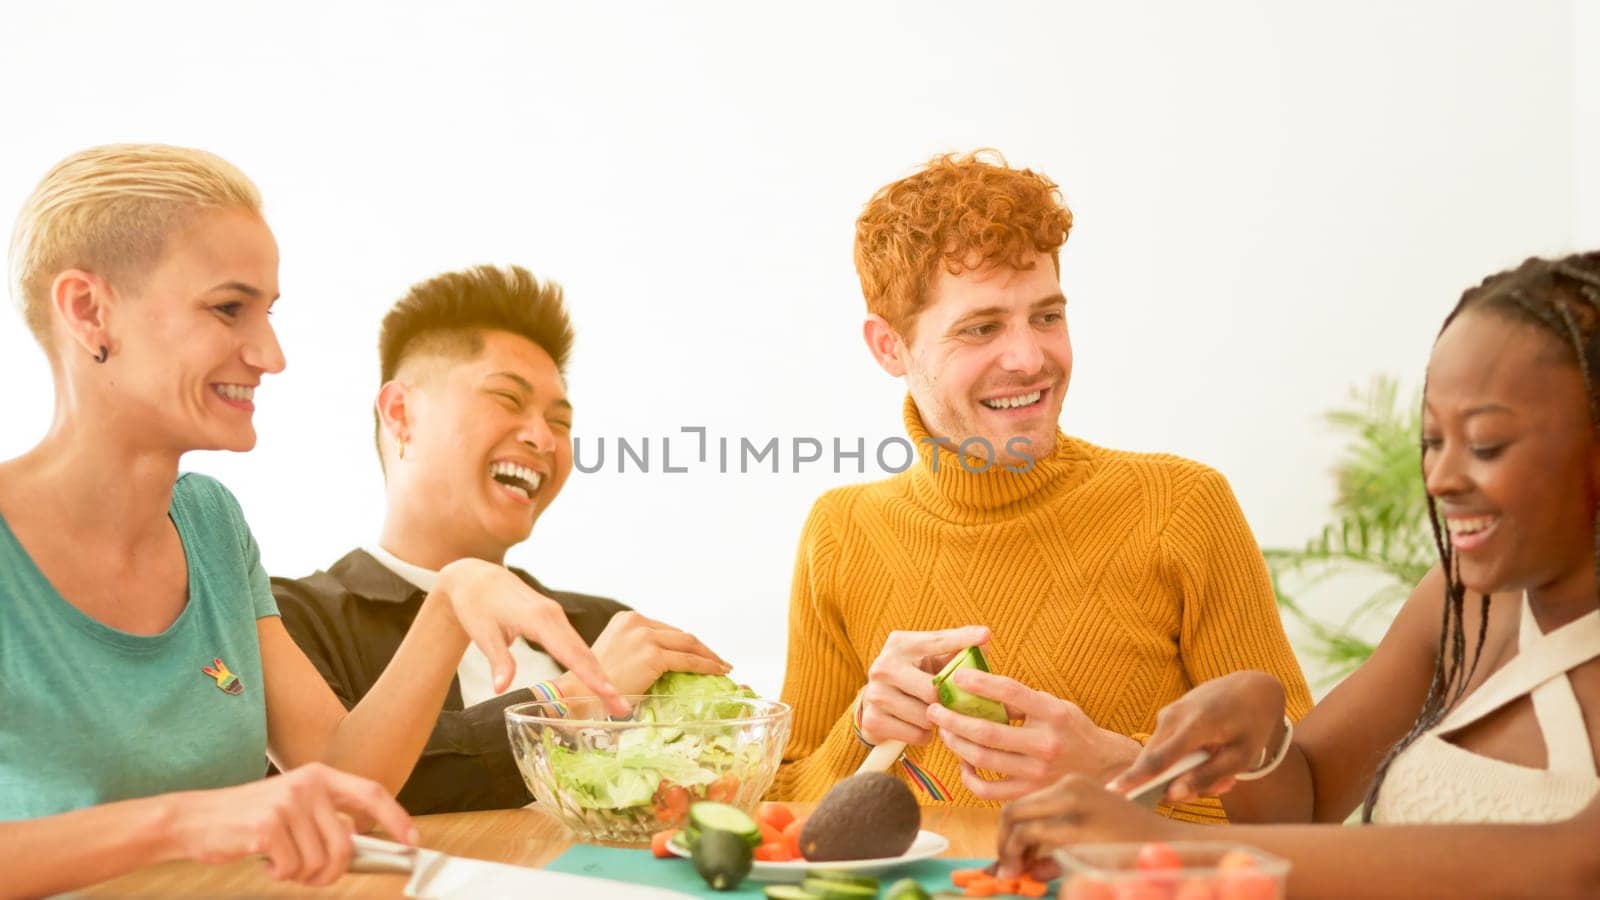 Group of multiethnic friends preparing a salad at home